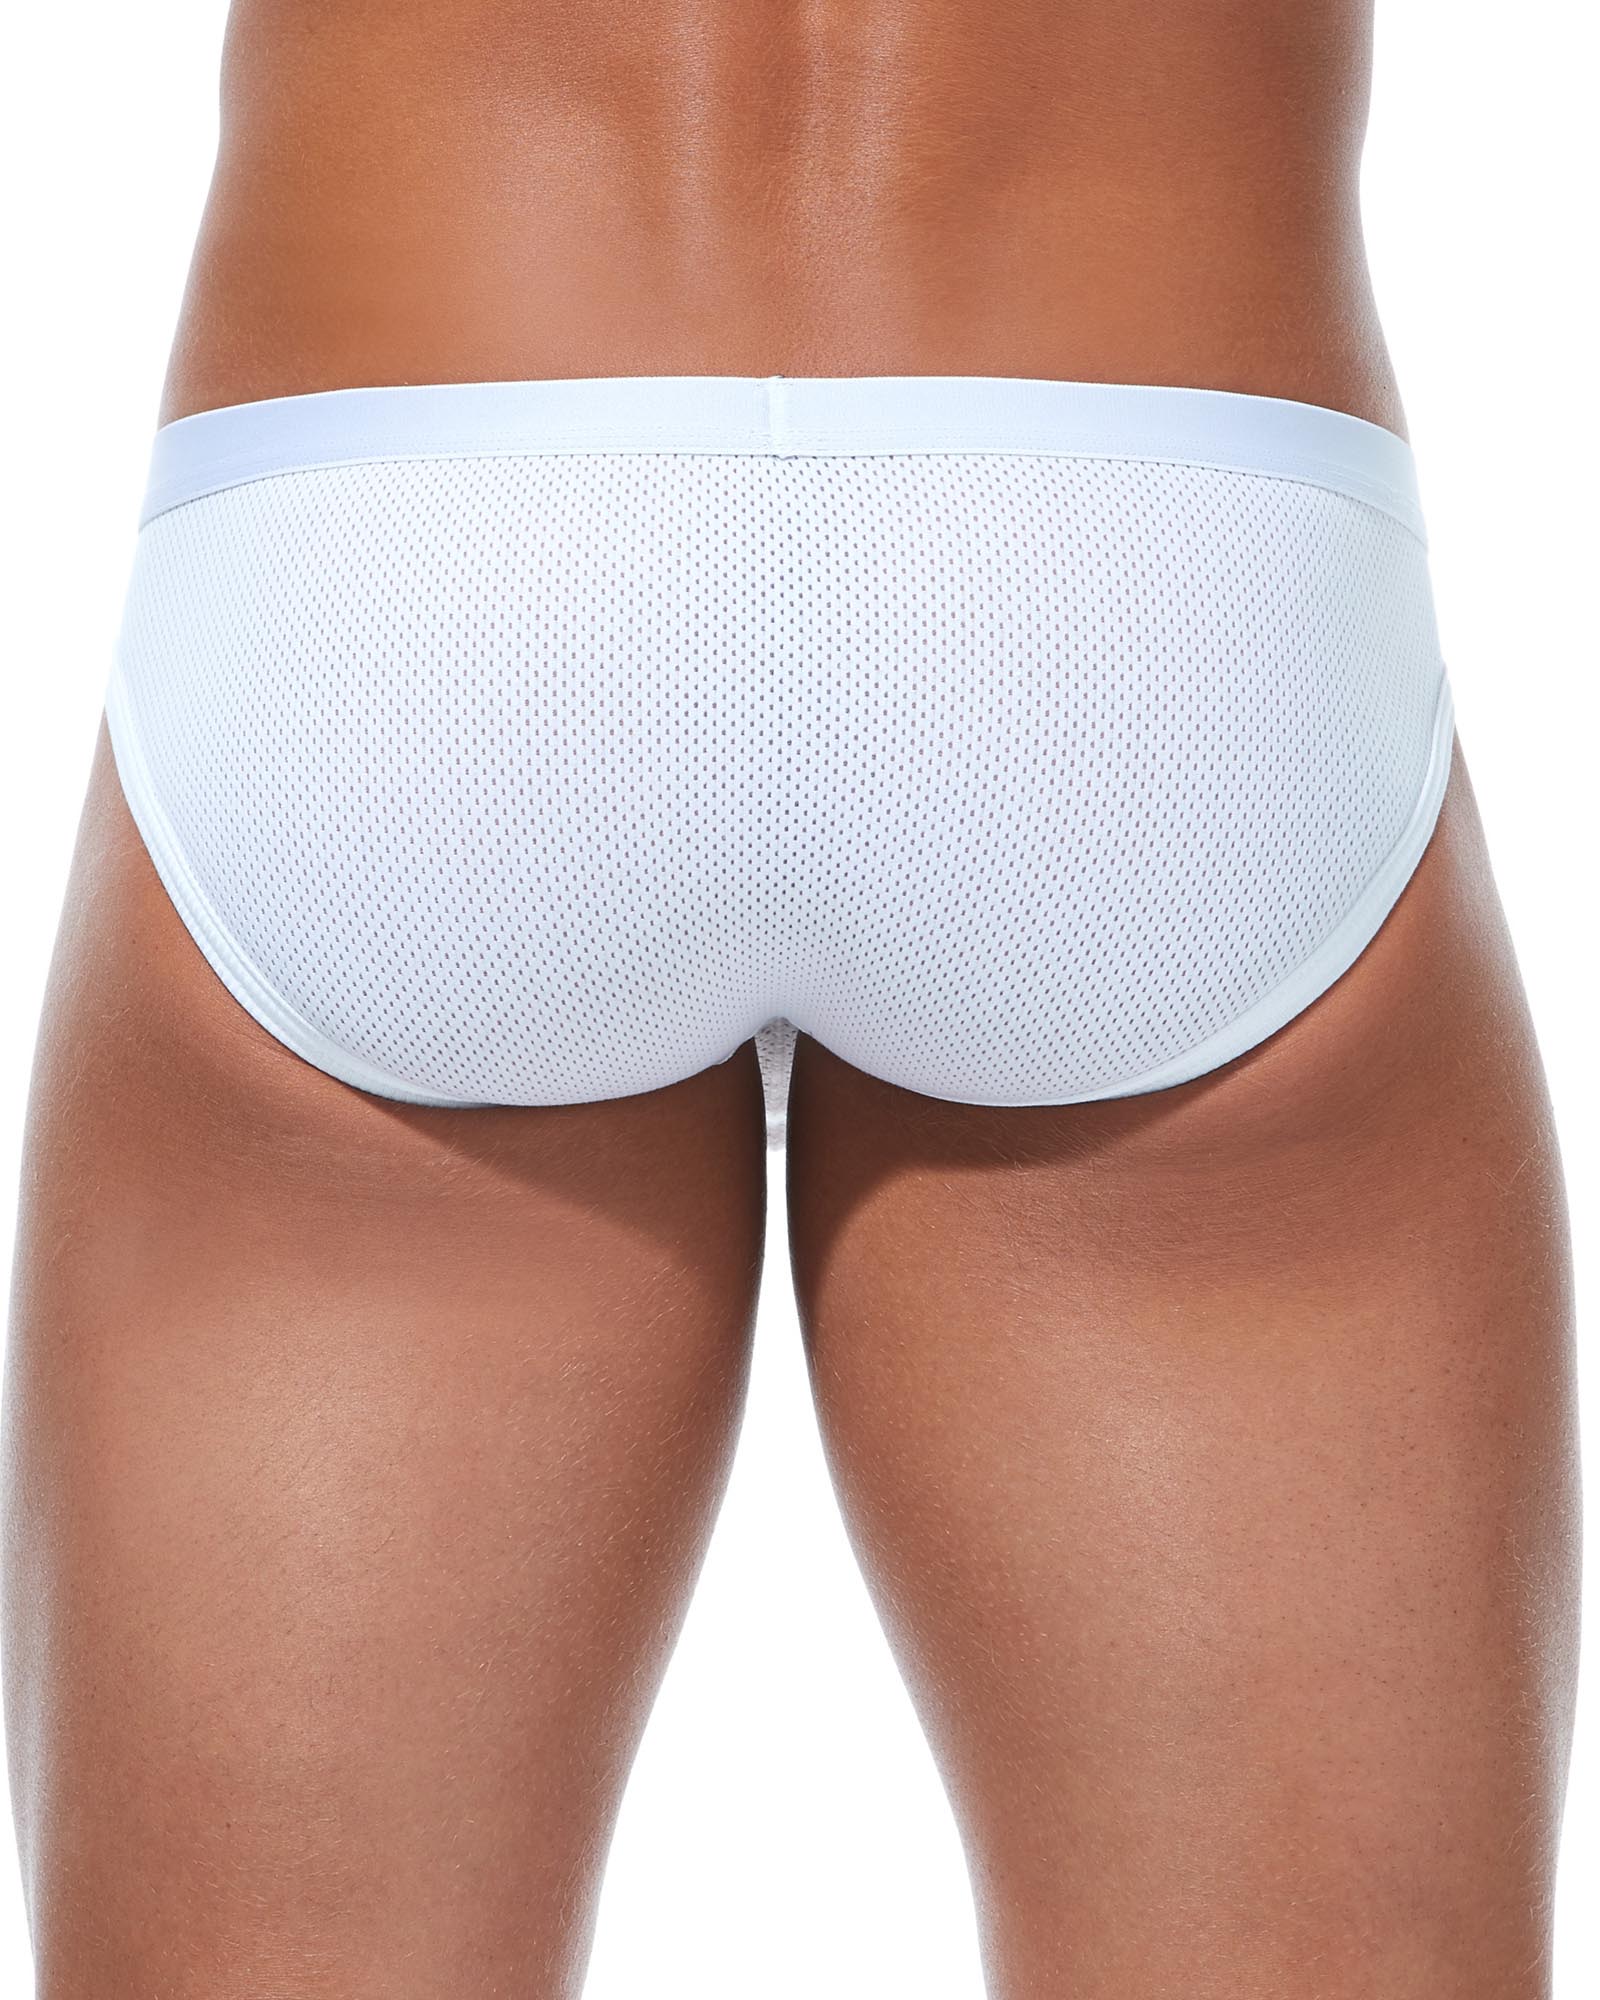 Gregg Homme Room-Max Air Brief, White, 172603-WH